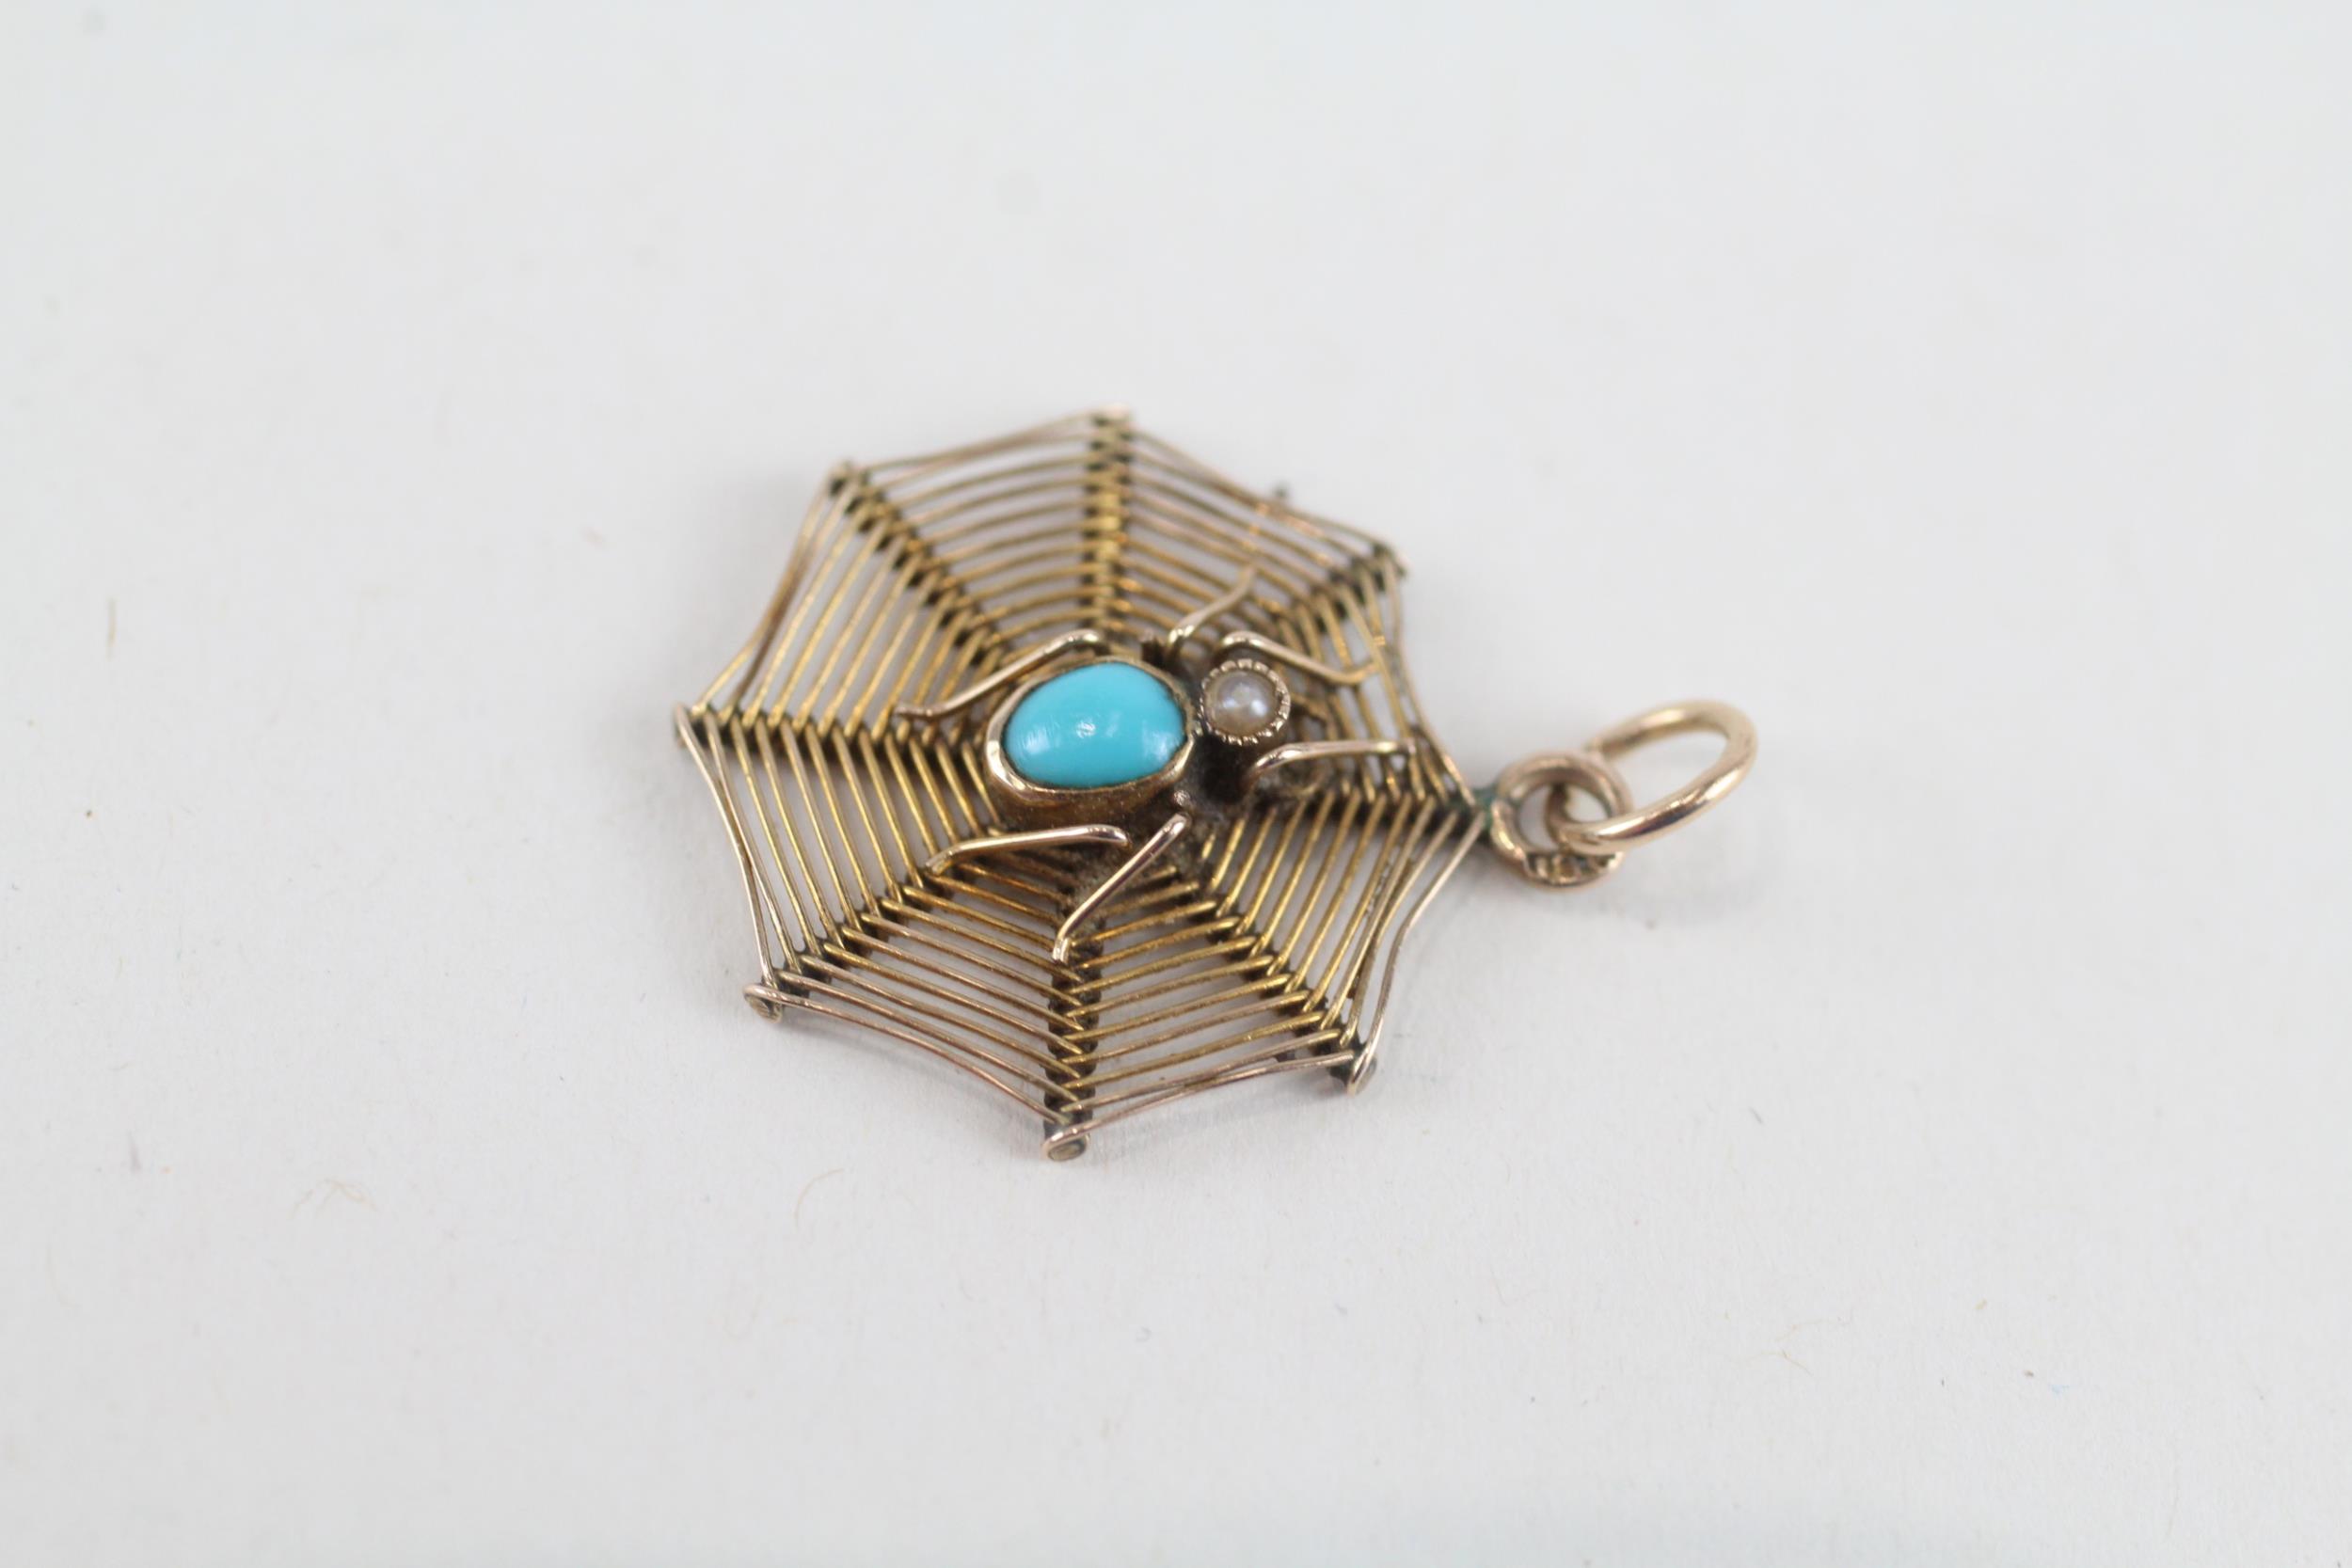 9ct gold antique turquoise & seed pearl 'spider in its web' pendant (1g) - Image 2 of 4